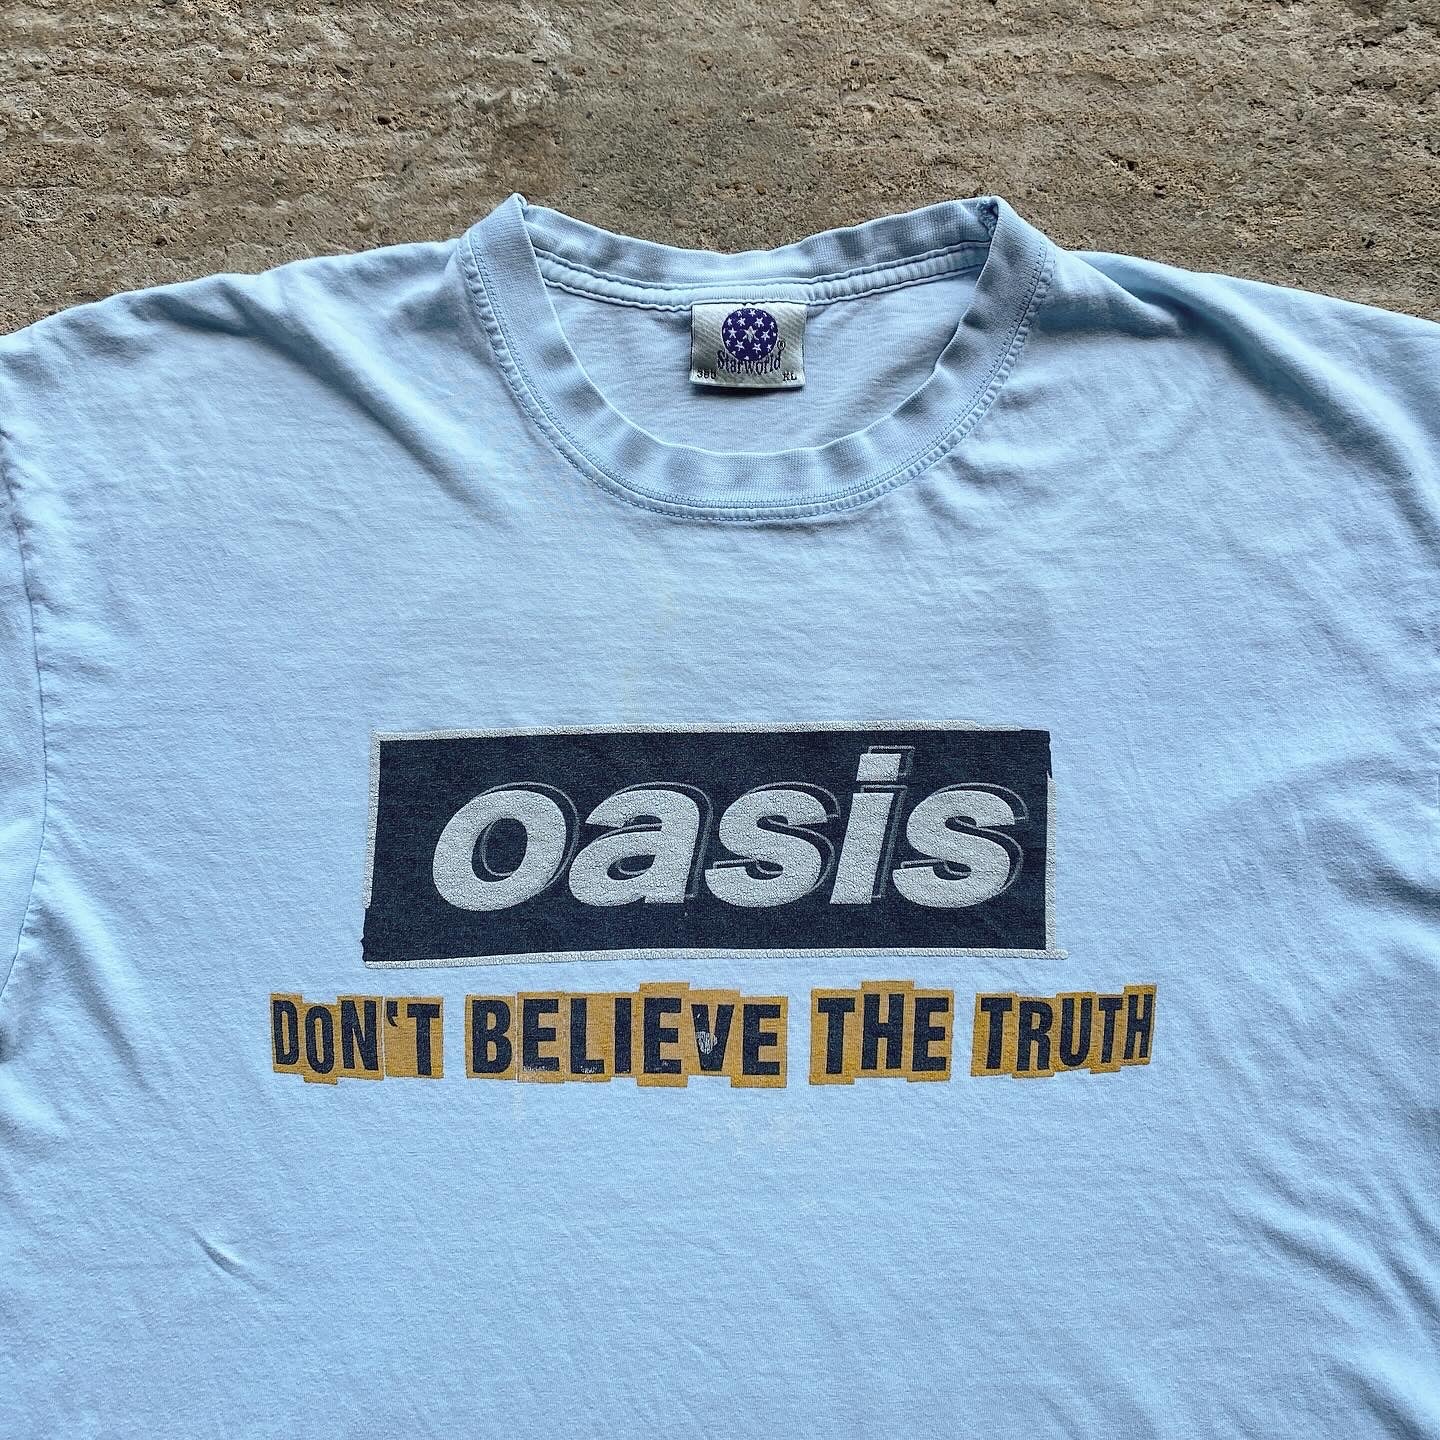 Oasis - 'Don't Believe The Truth' - 2005 - L